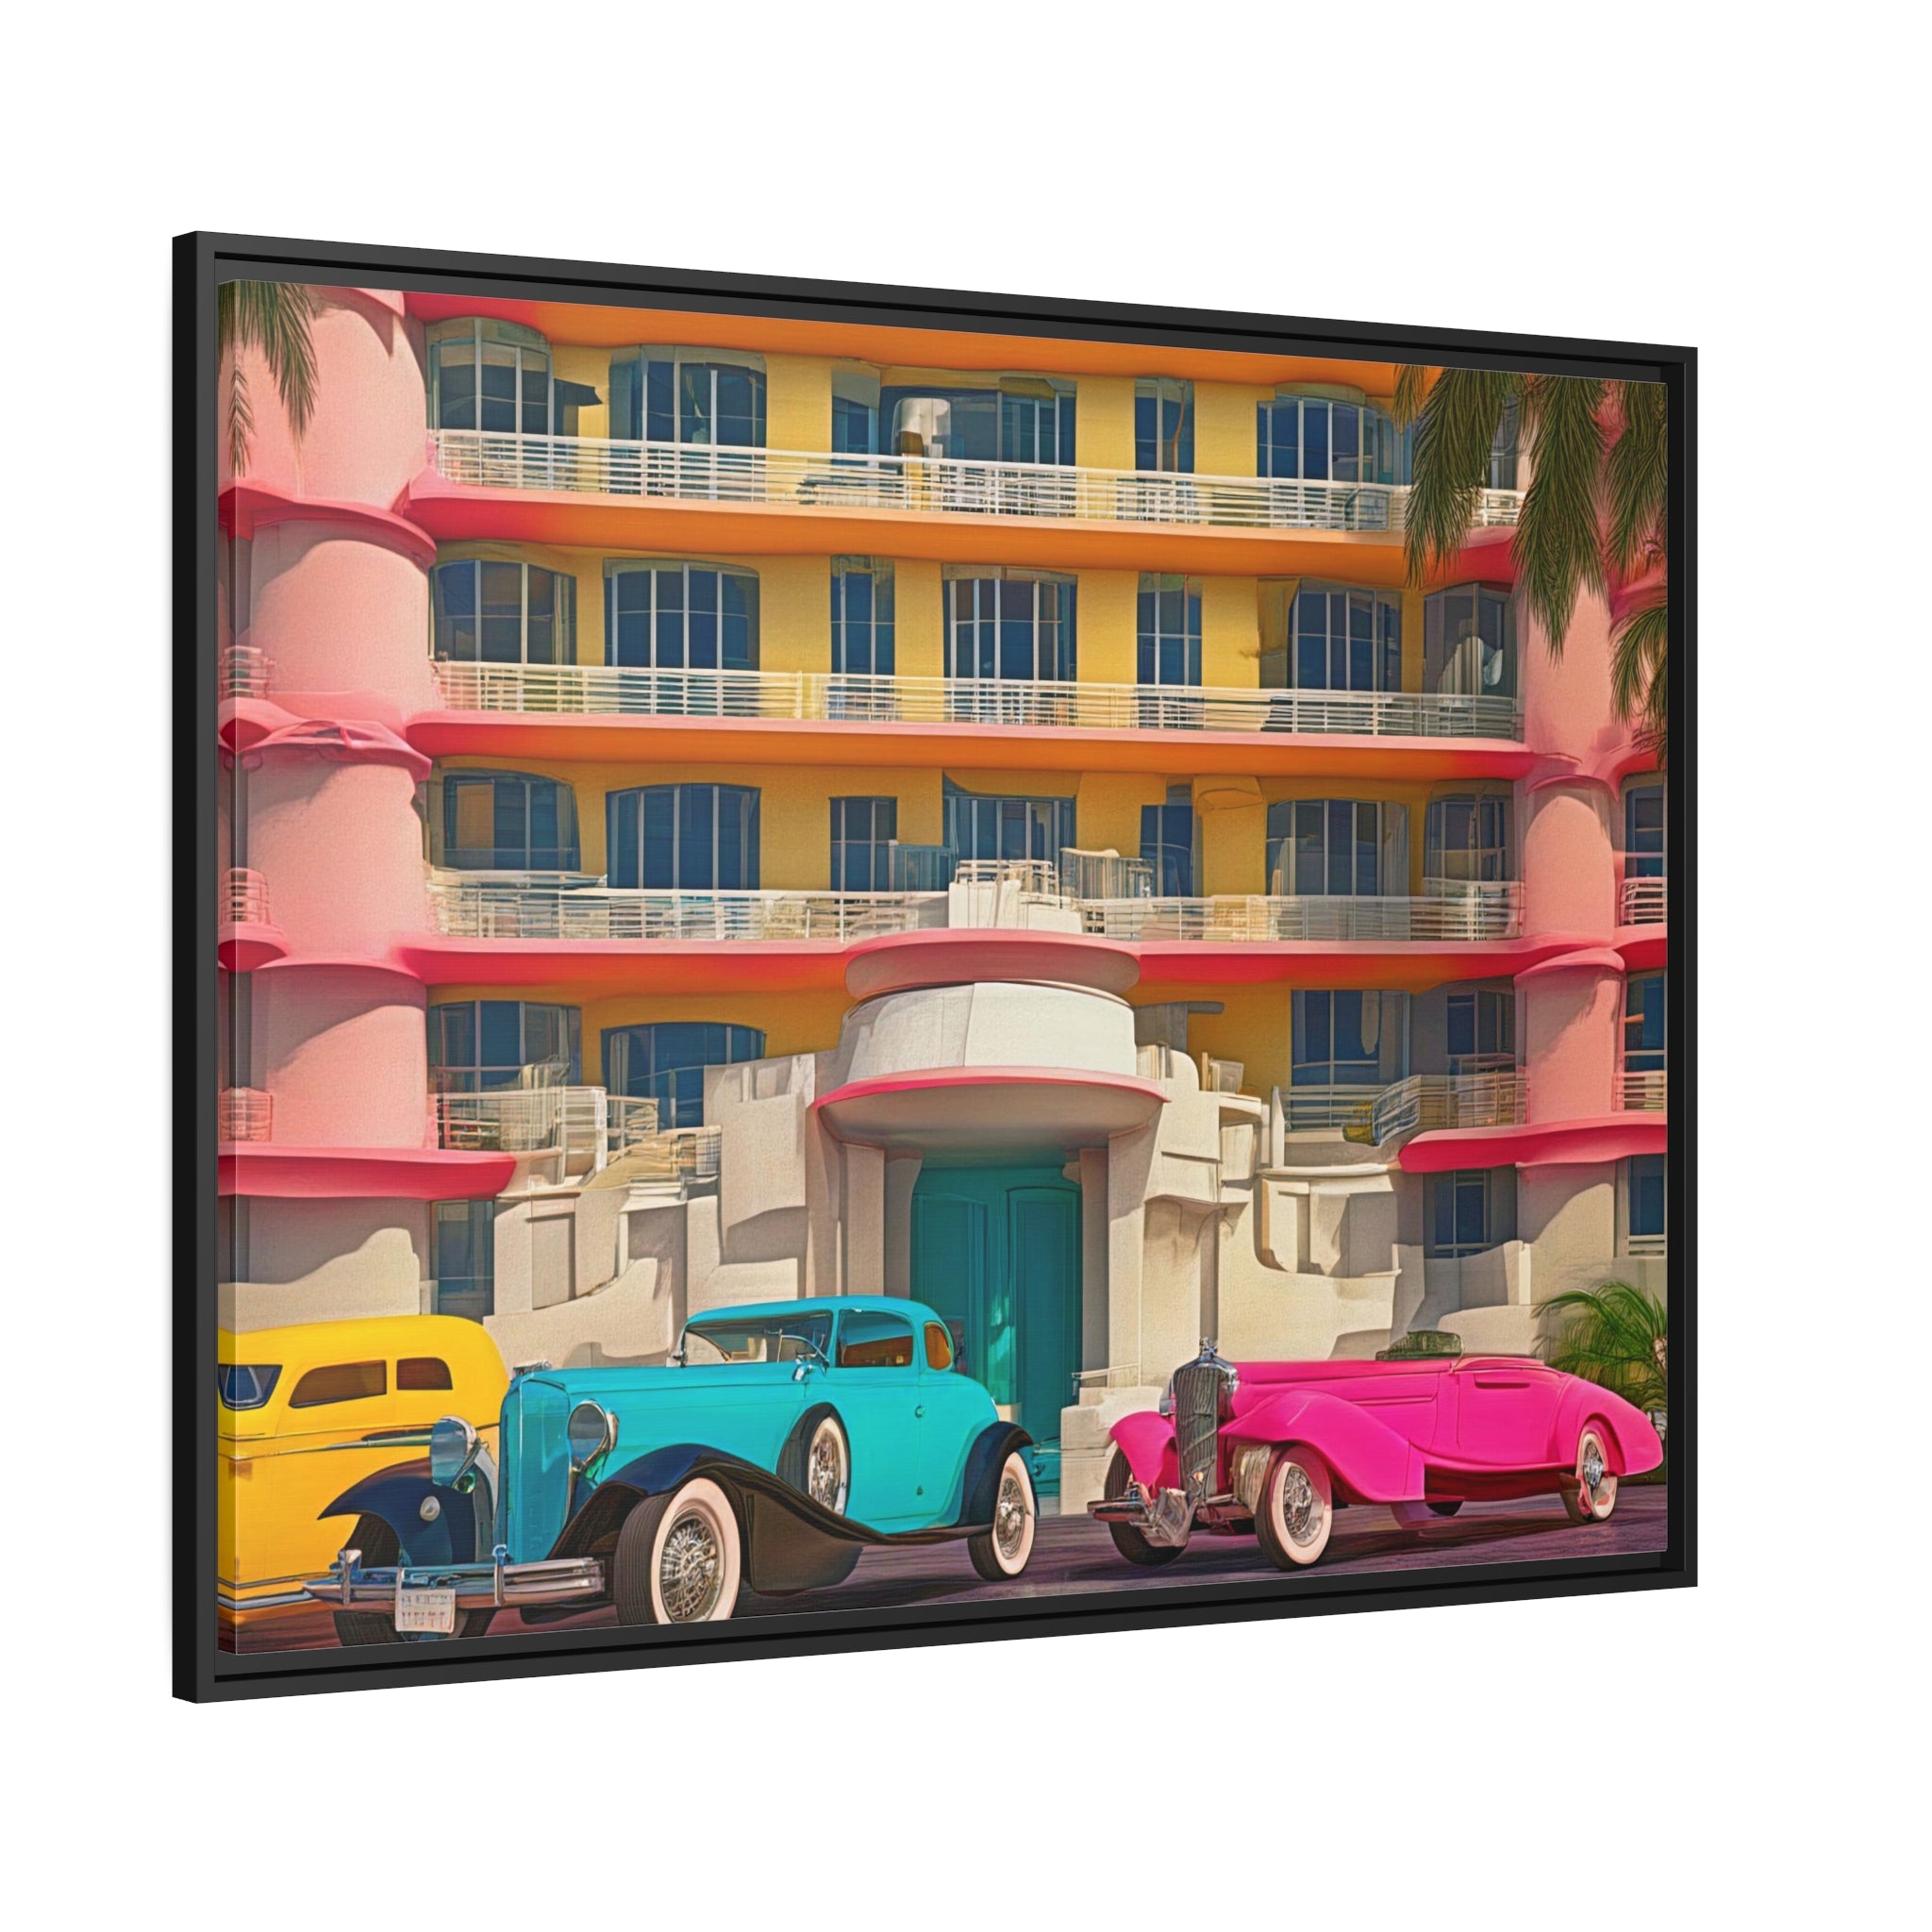 Wall Art I’lll BE RIGHT BACK Canvas Print Art Deco Painting Giclee 40X30 + Frame Love Beauty Design House Home Office Decor Gift Ready to Hang